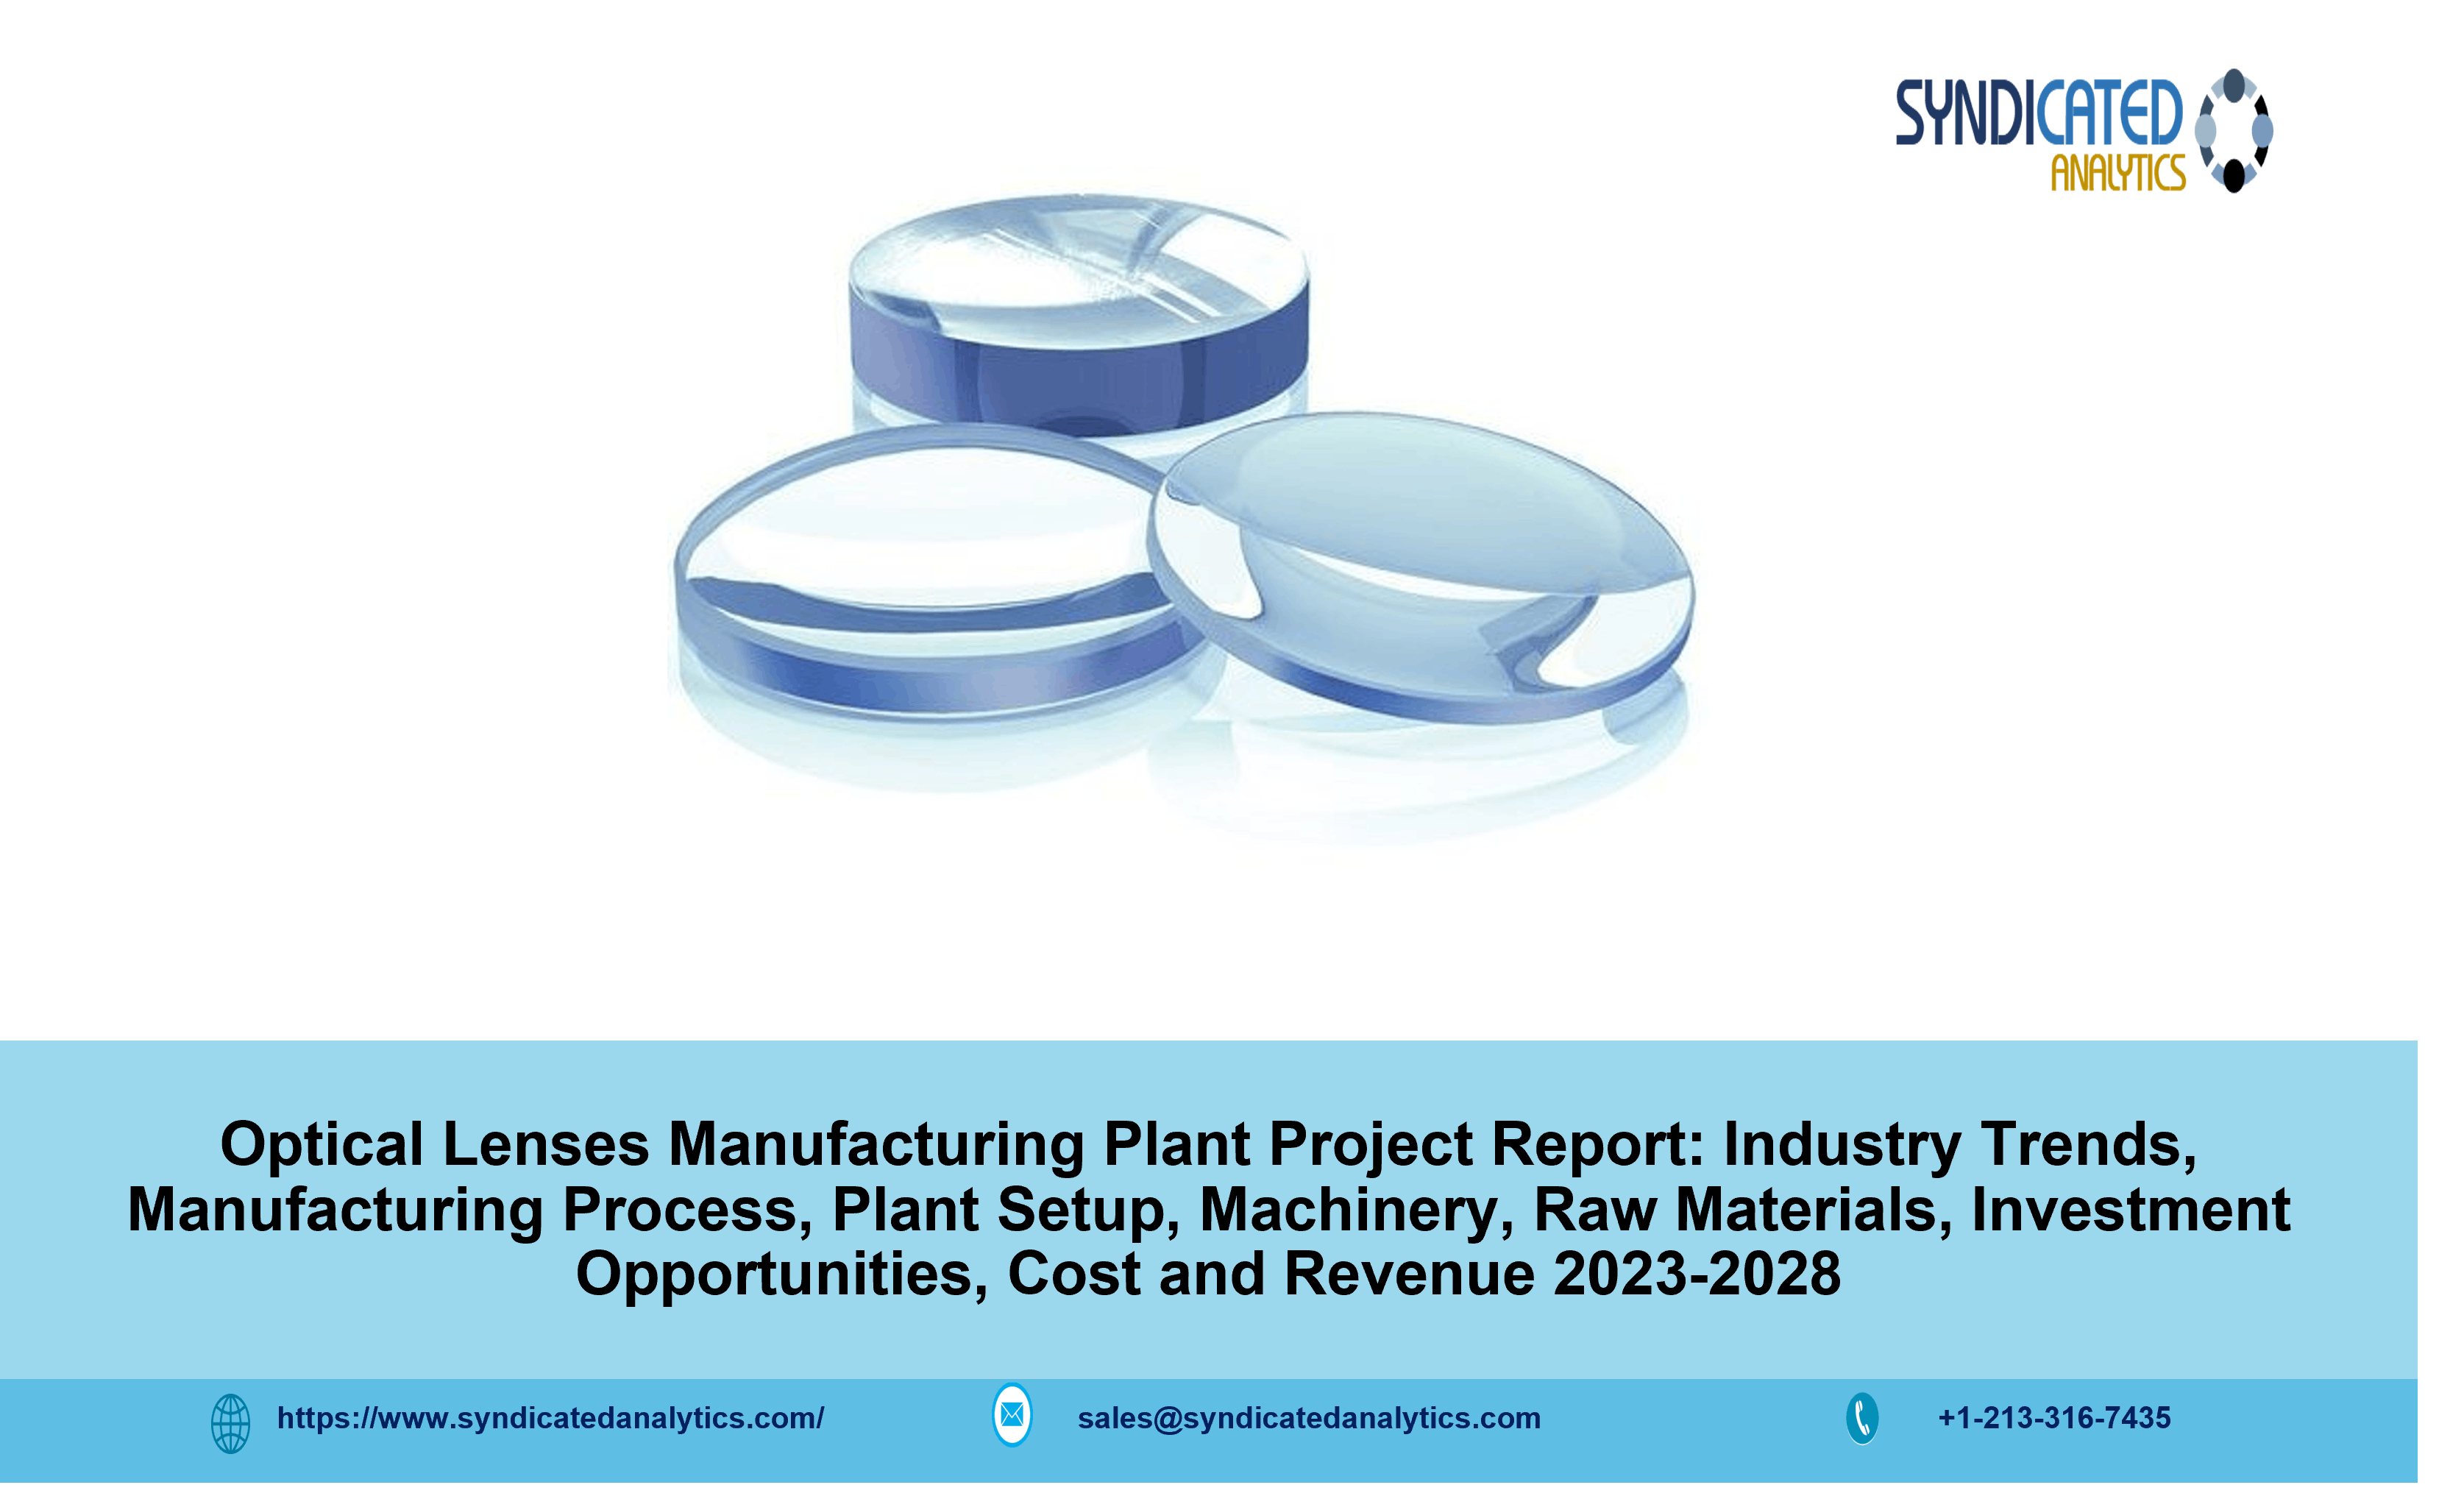 Optical Lenses Manufacturing Plant Project Report.png